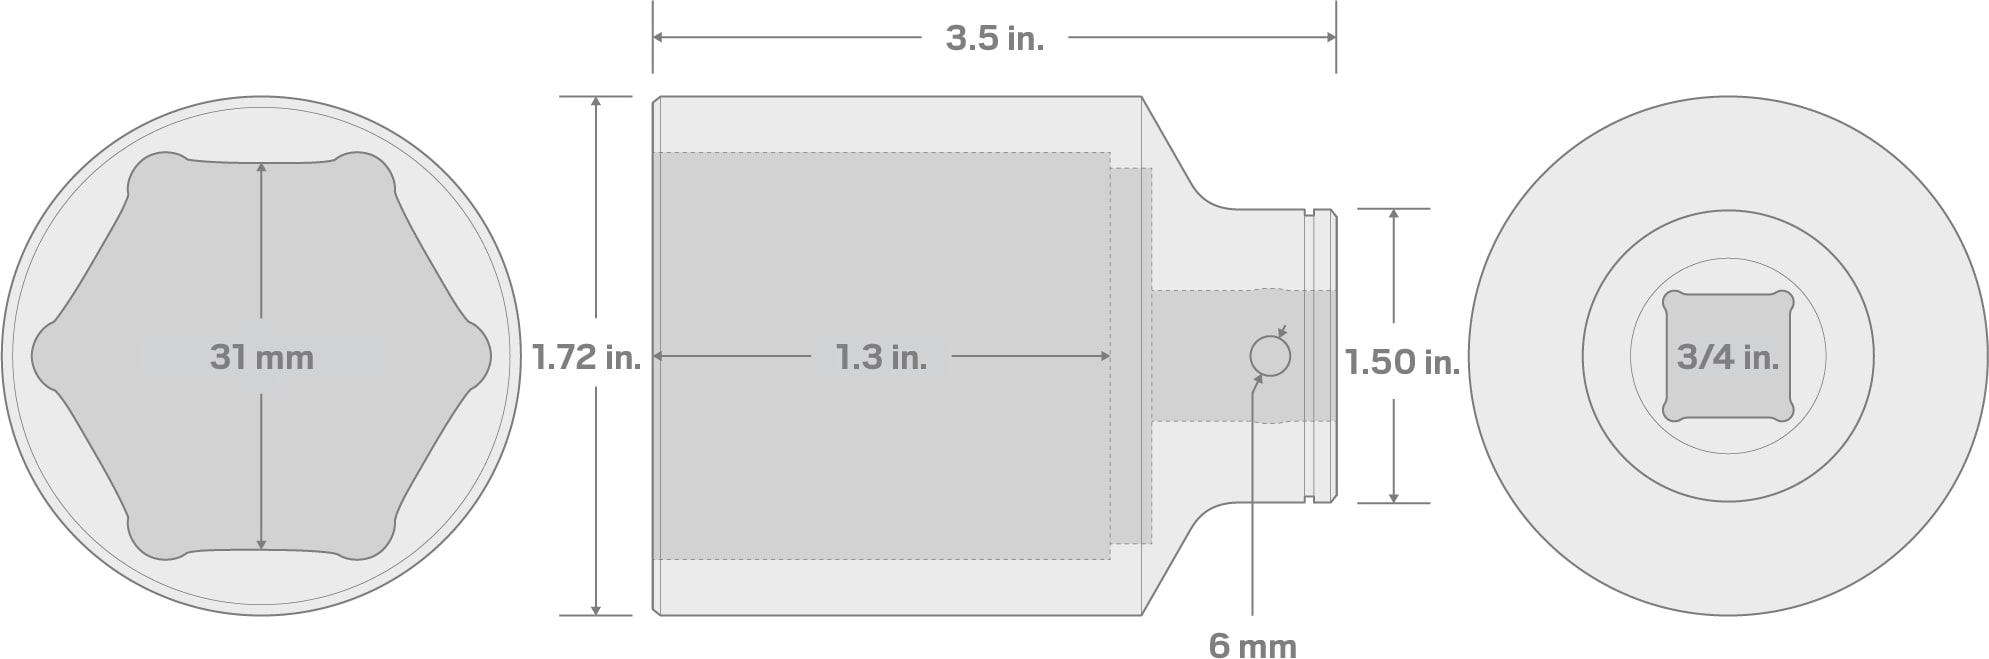 Specs for 3/4 Inch Drive x 31 mm Deep 6-Point Socket